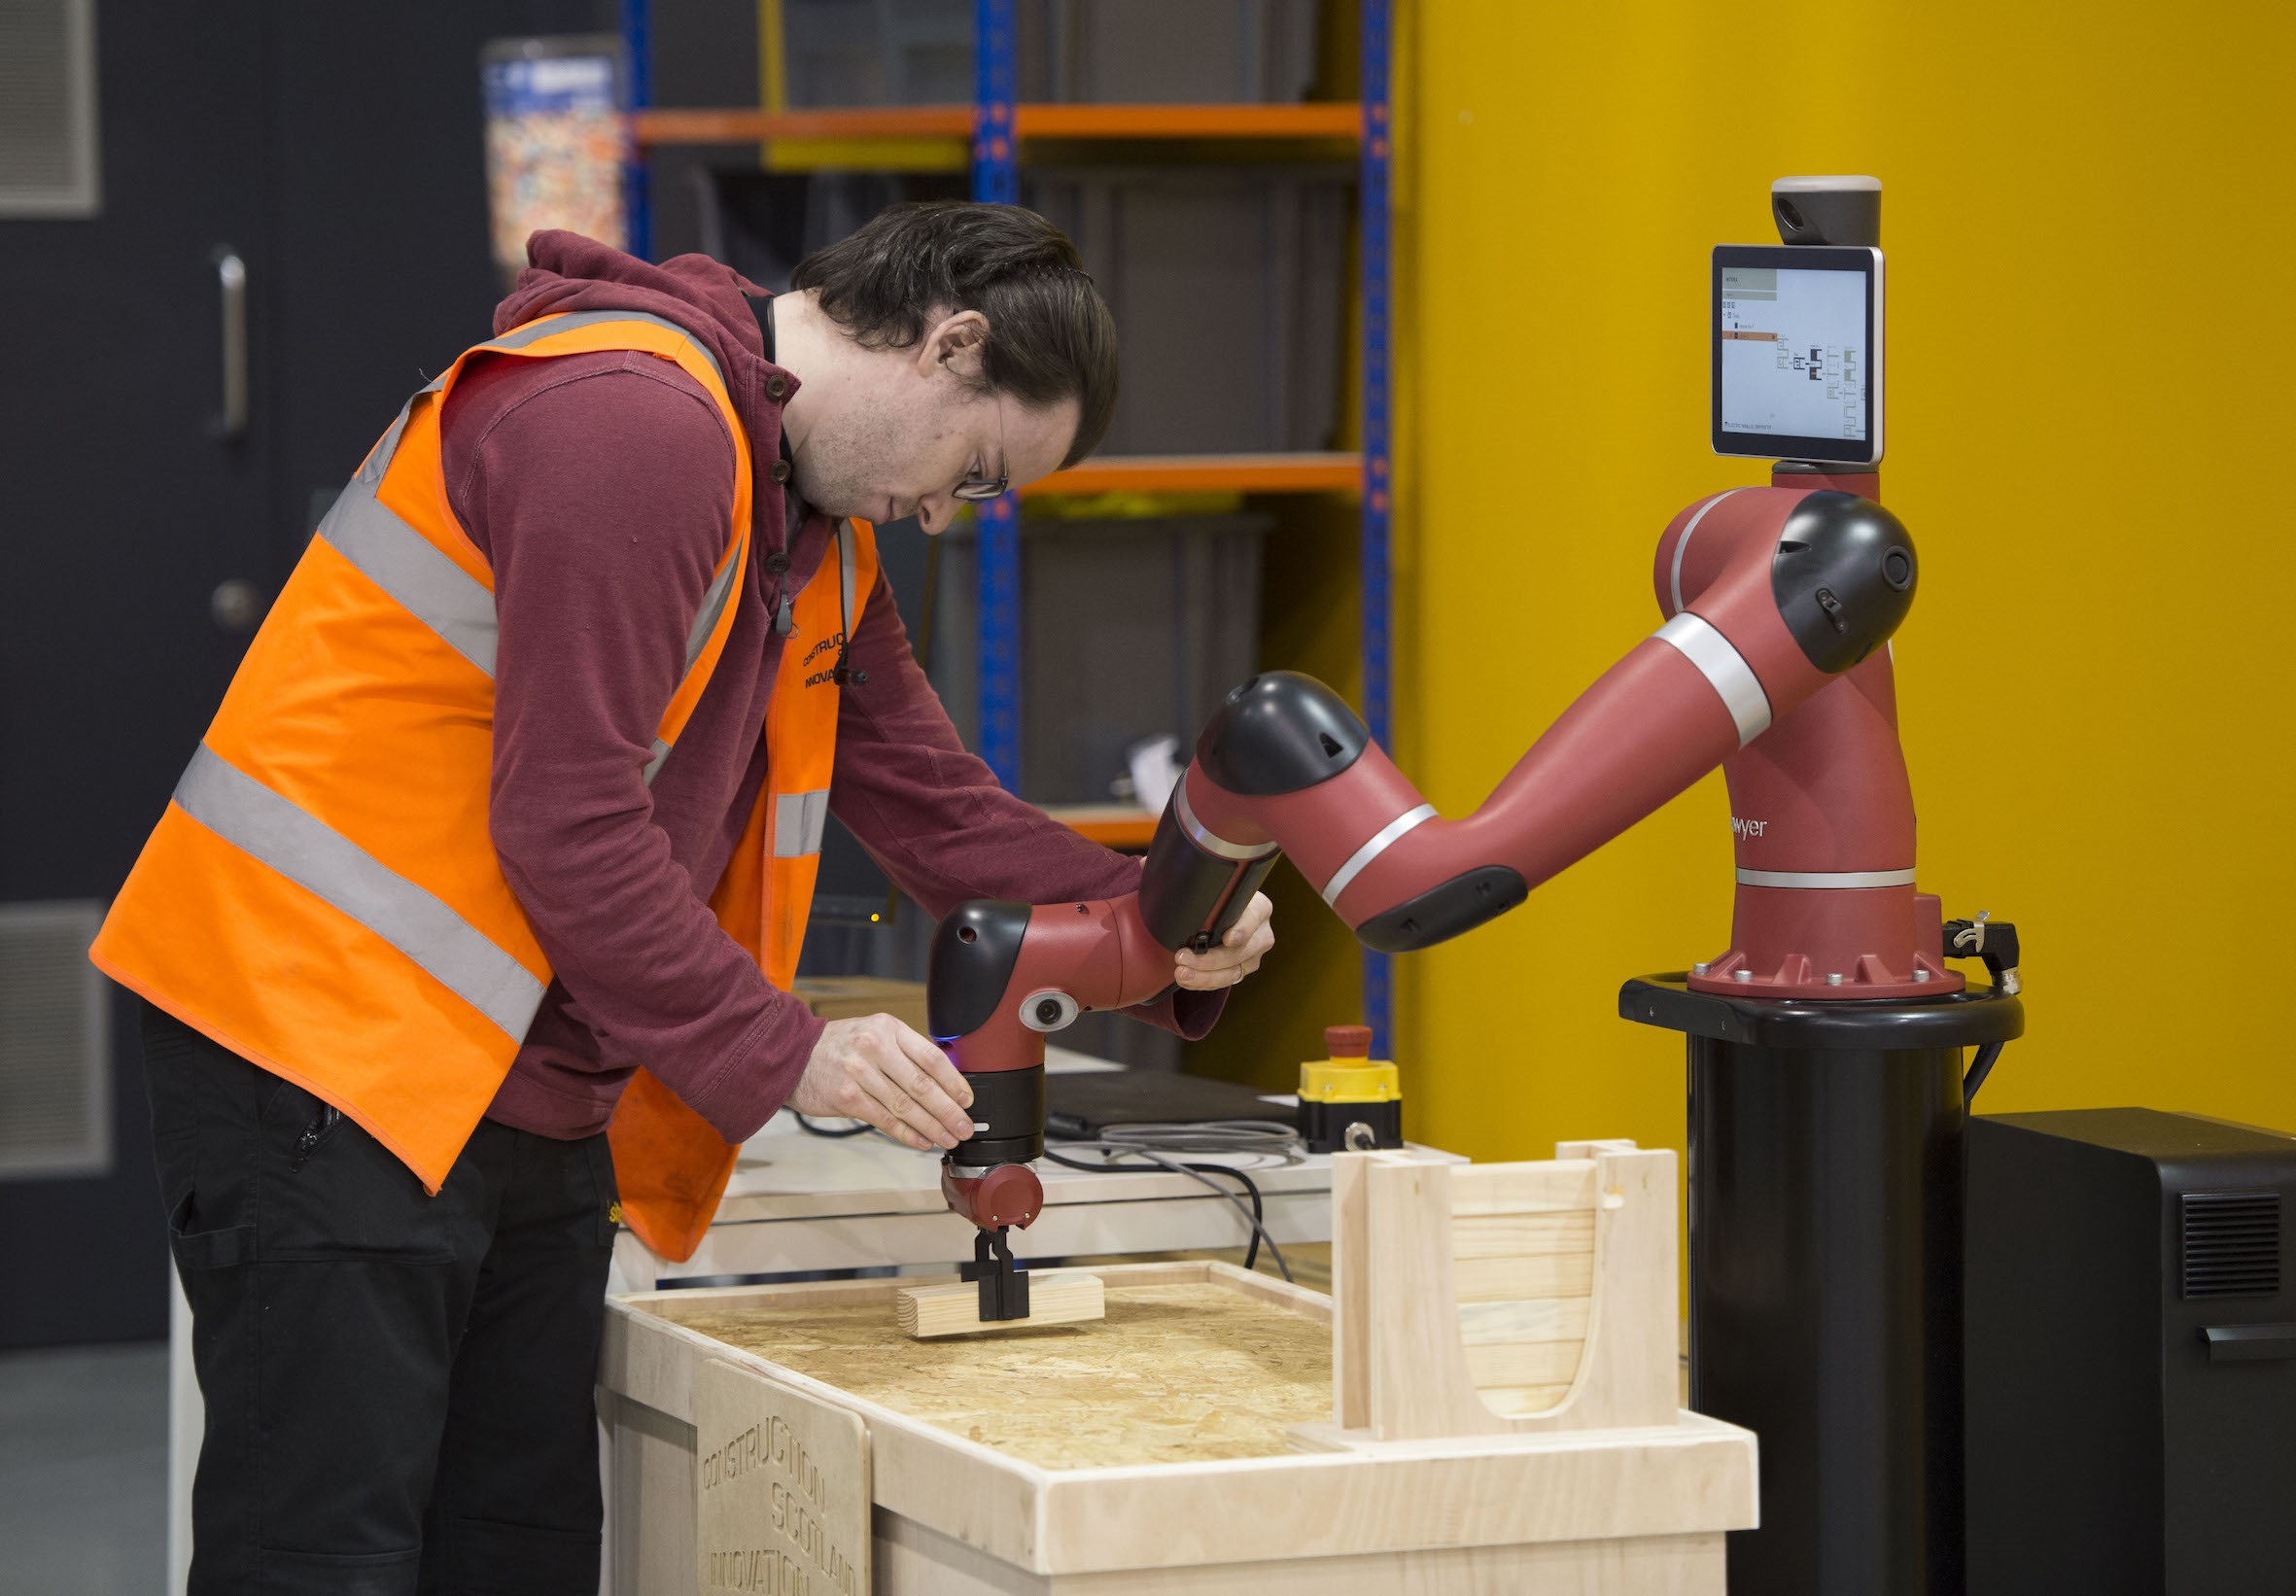 Scotland to hold its first ever showcase of automation and robotics